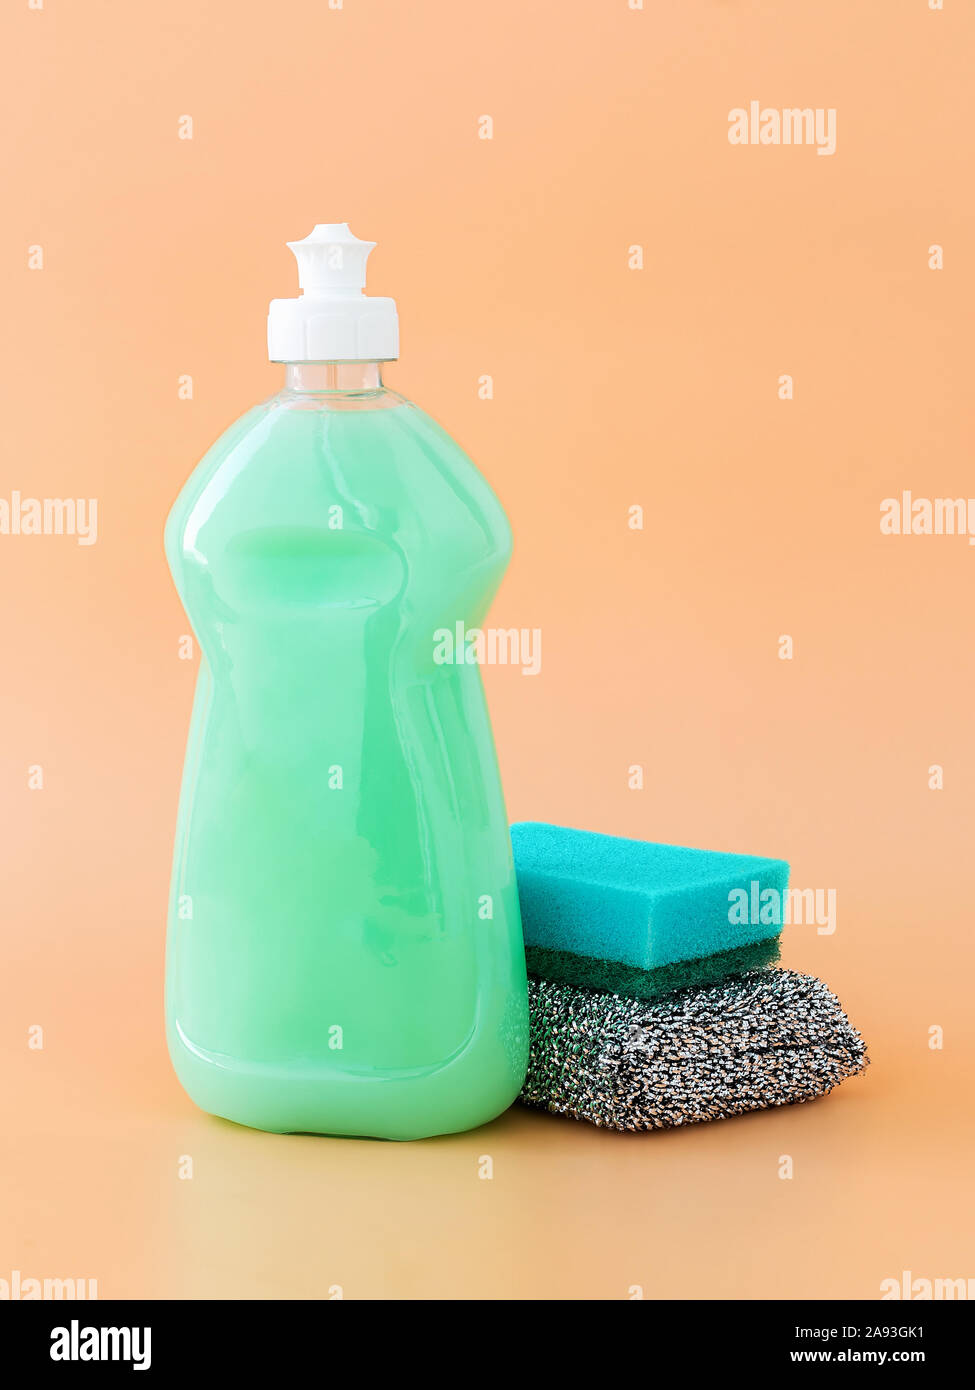 https://c8.alamy.com/comp/2A93GK1/green-dish-washing-liquid-in-a-transparent-plastic-bottle-and-two-foam-sponges-on-a-pastel-orange-background-kitchen-detergent-household-chemicals-2A93GK1.jpg